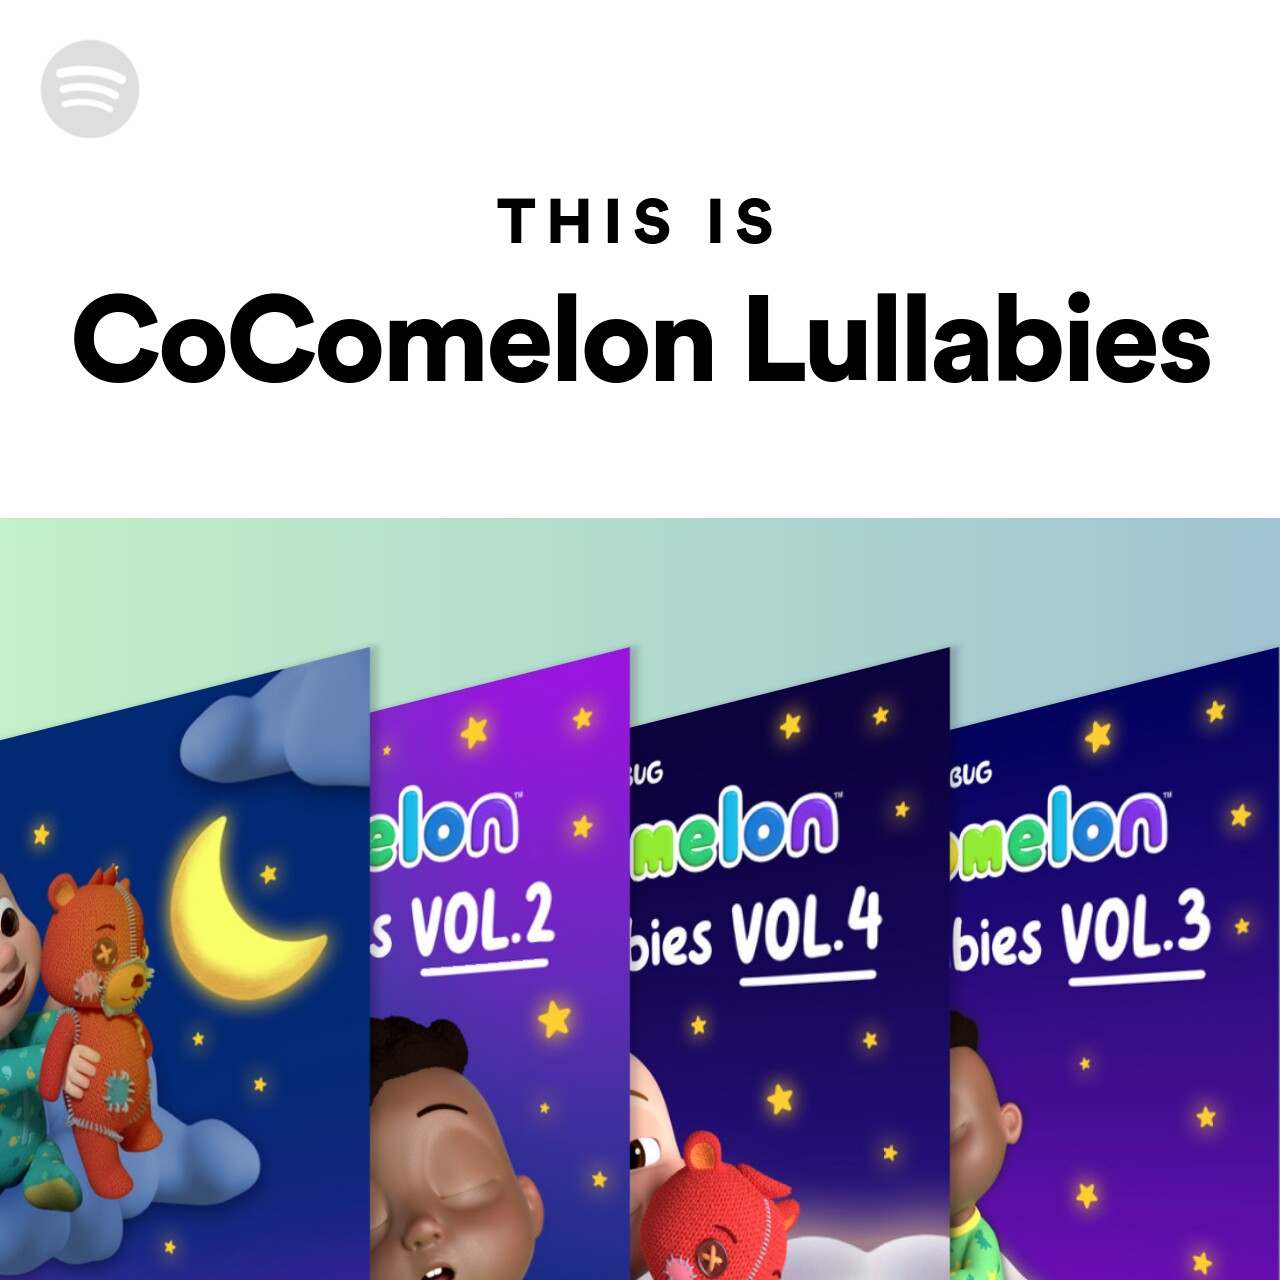 This Is CoComelon Lullabies